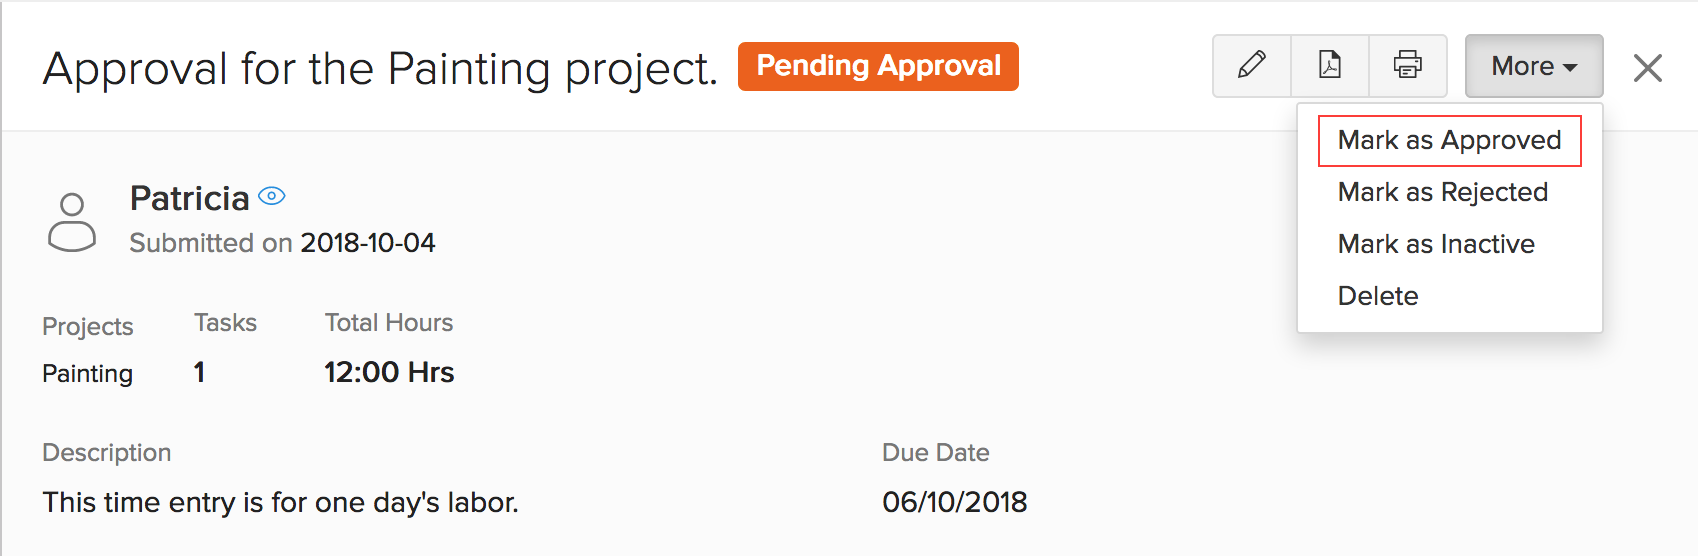 Approve Client Approval